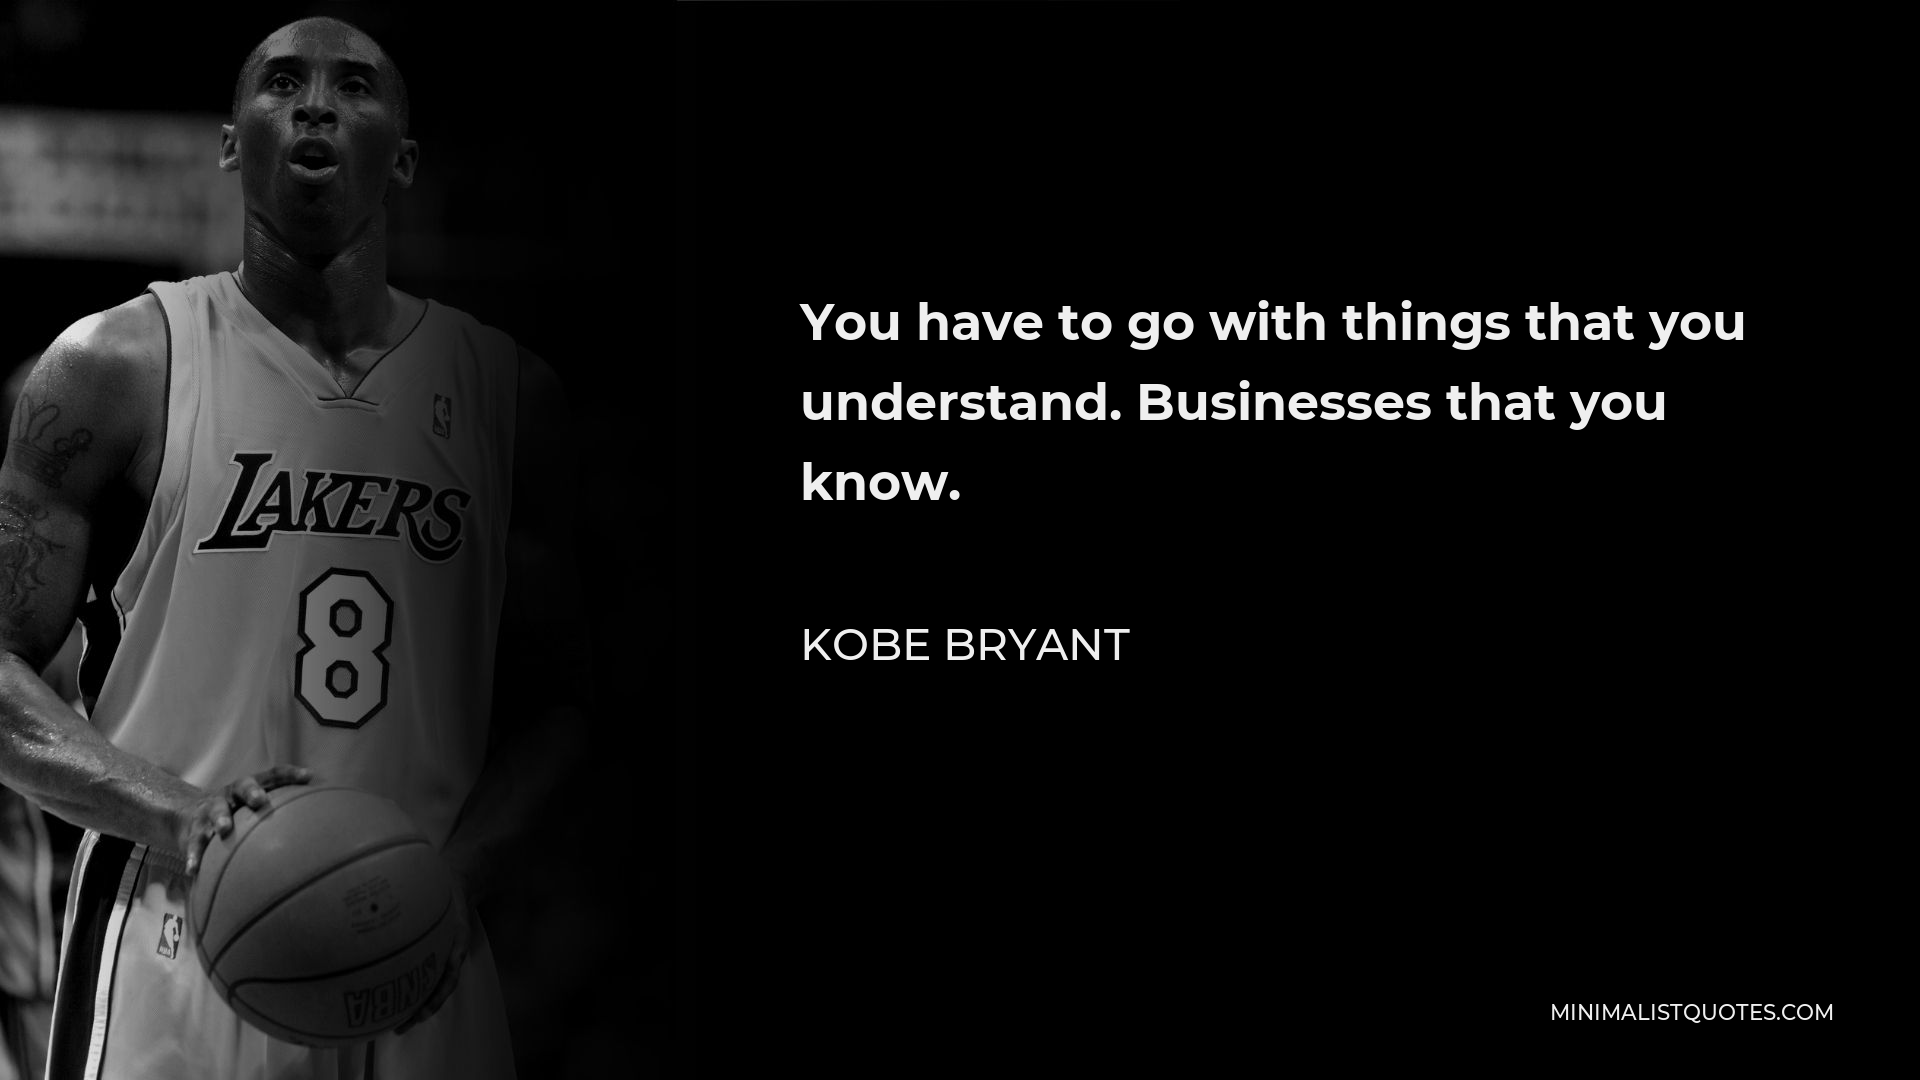 Kobe Bryant Quote - You have to go with things that you understand. Businesses that you know.